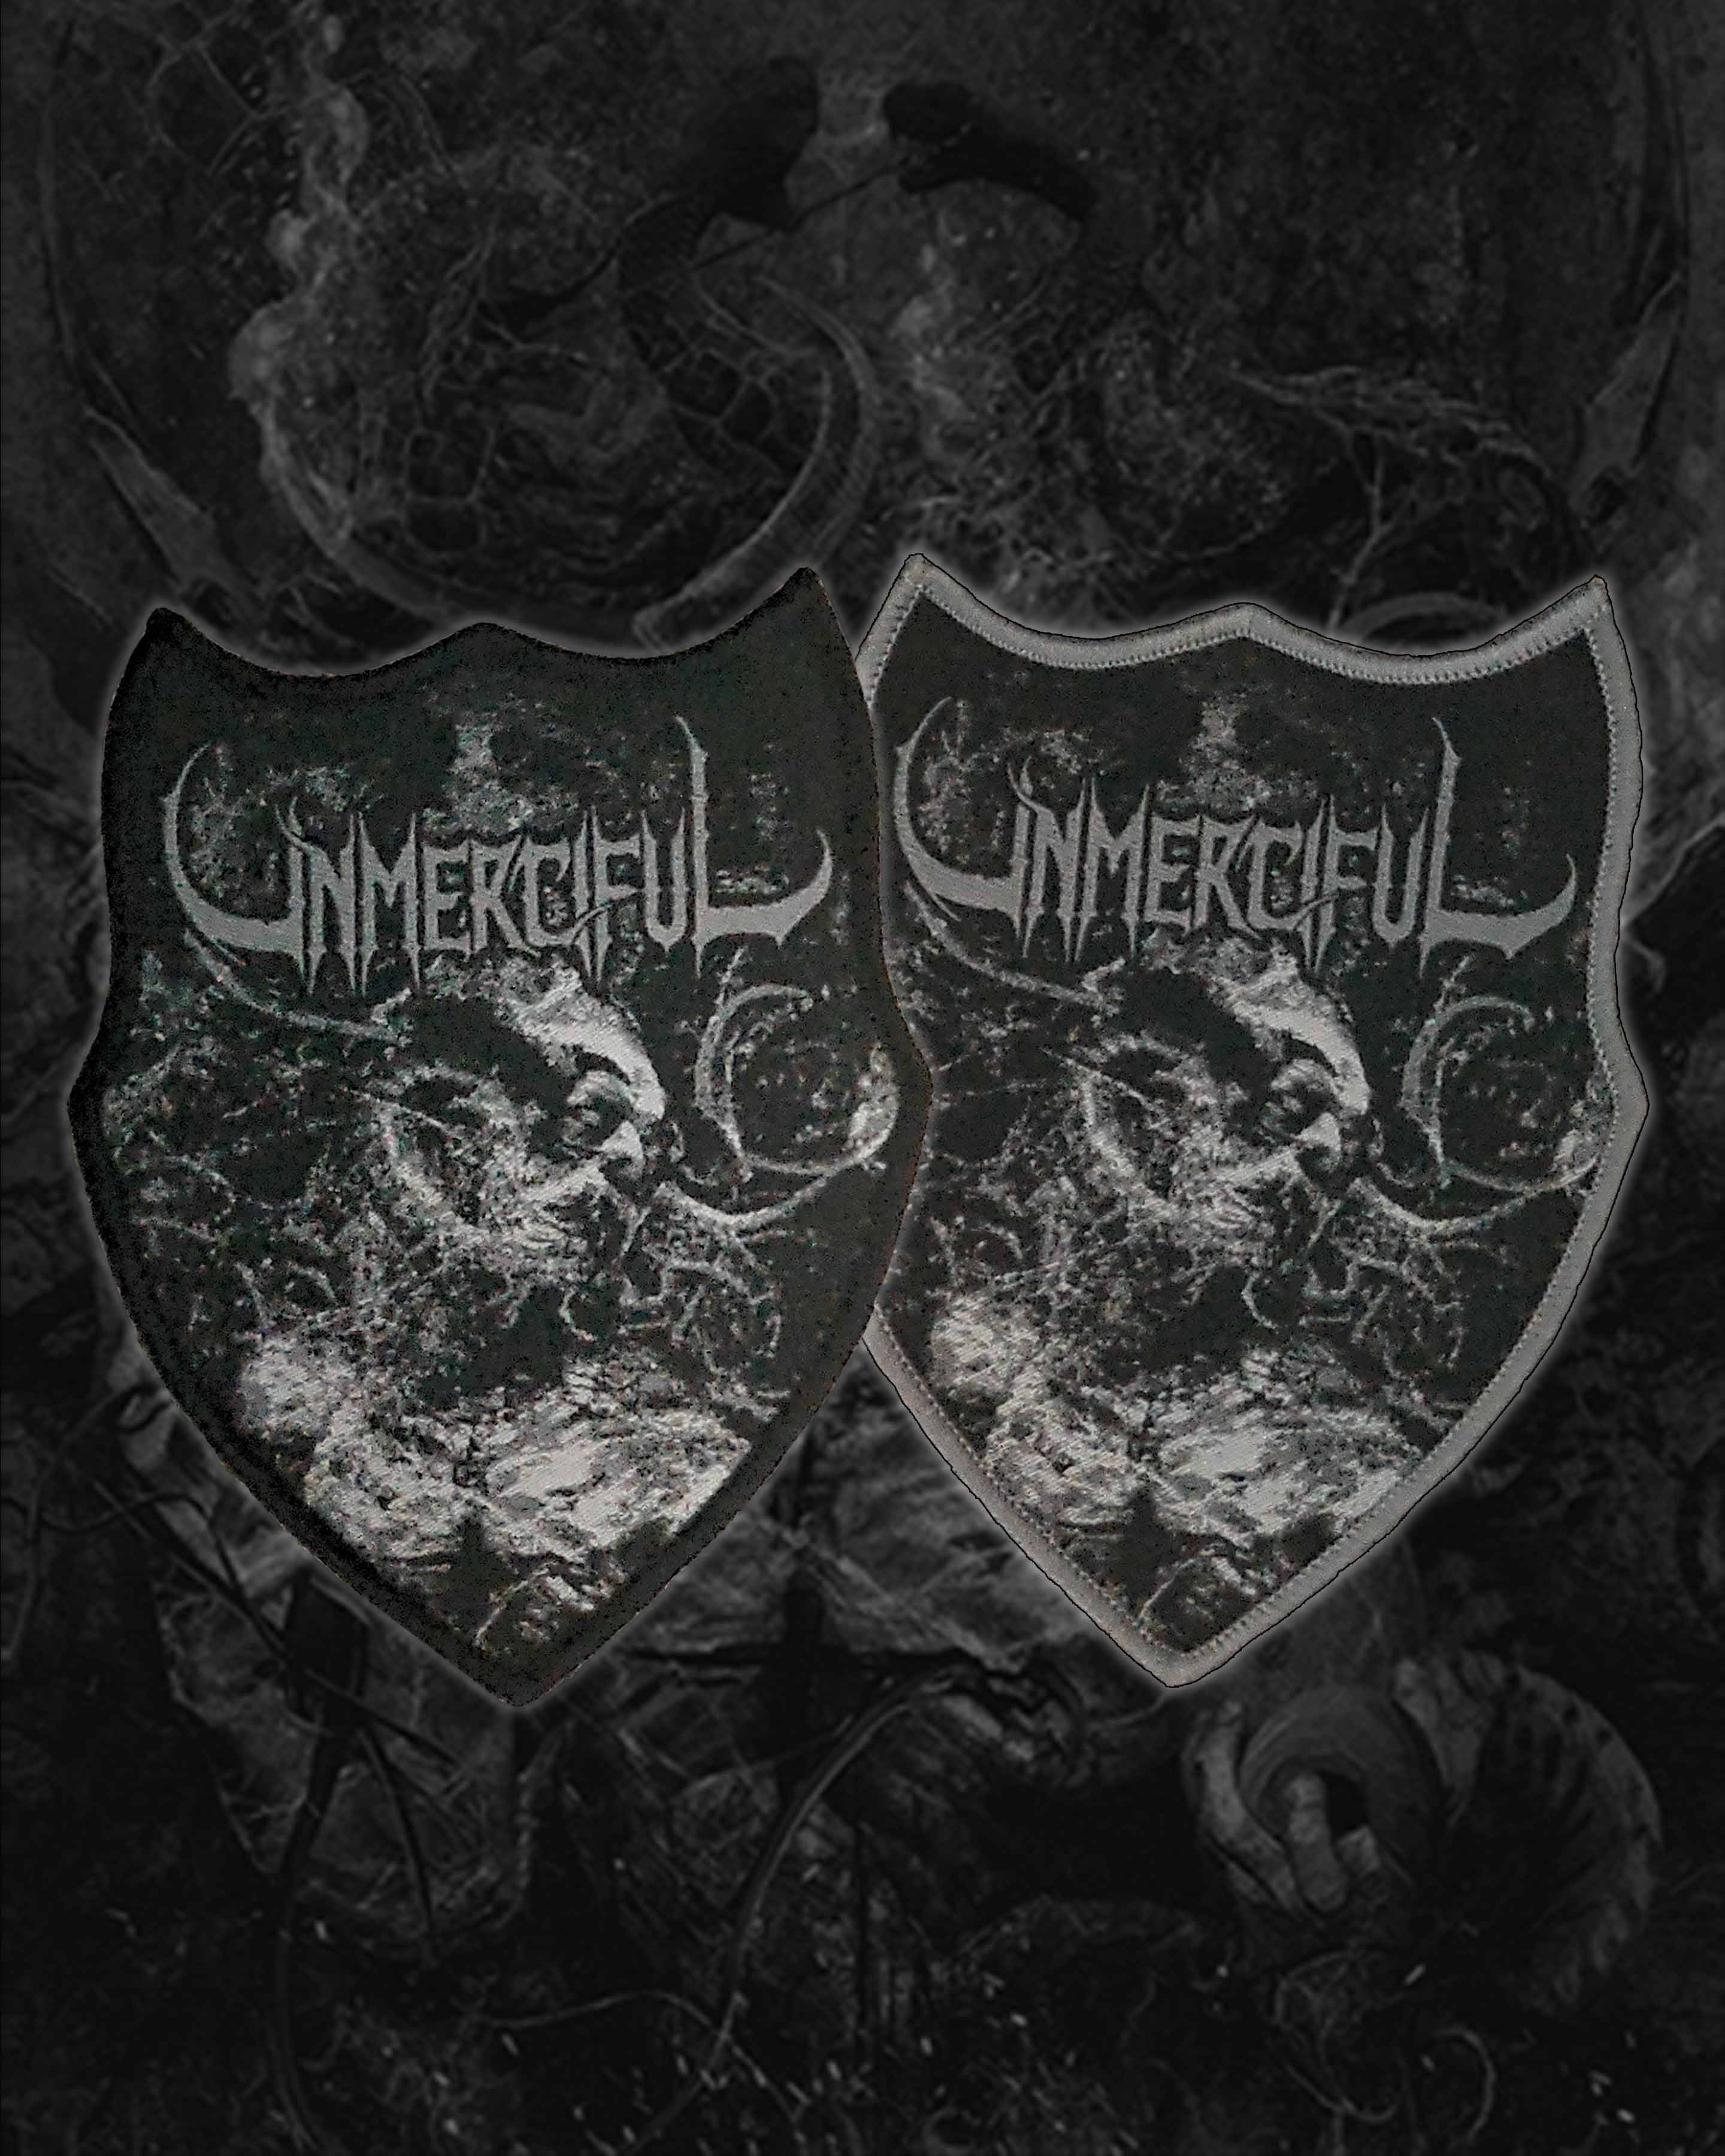 Unmerciful - Wrath Encompassed Patches